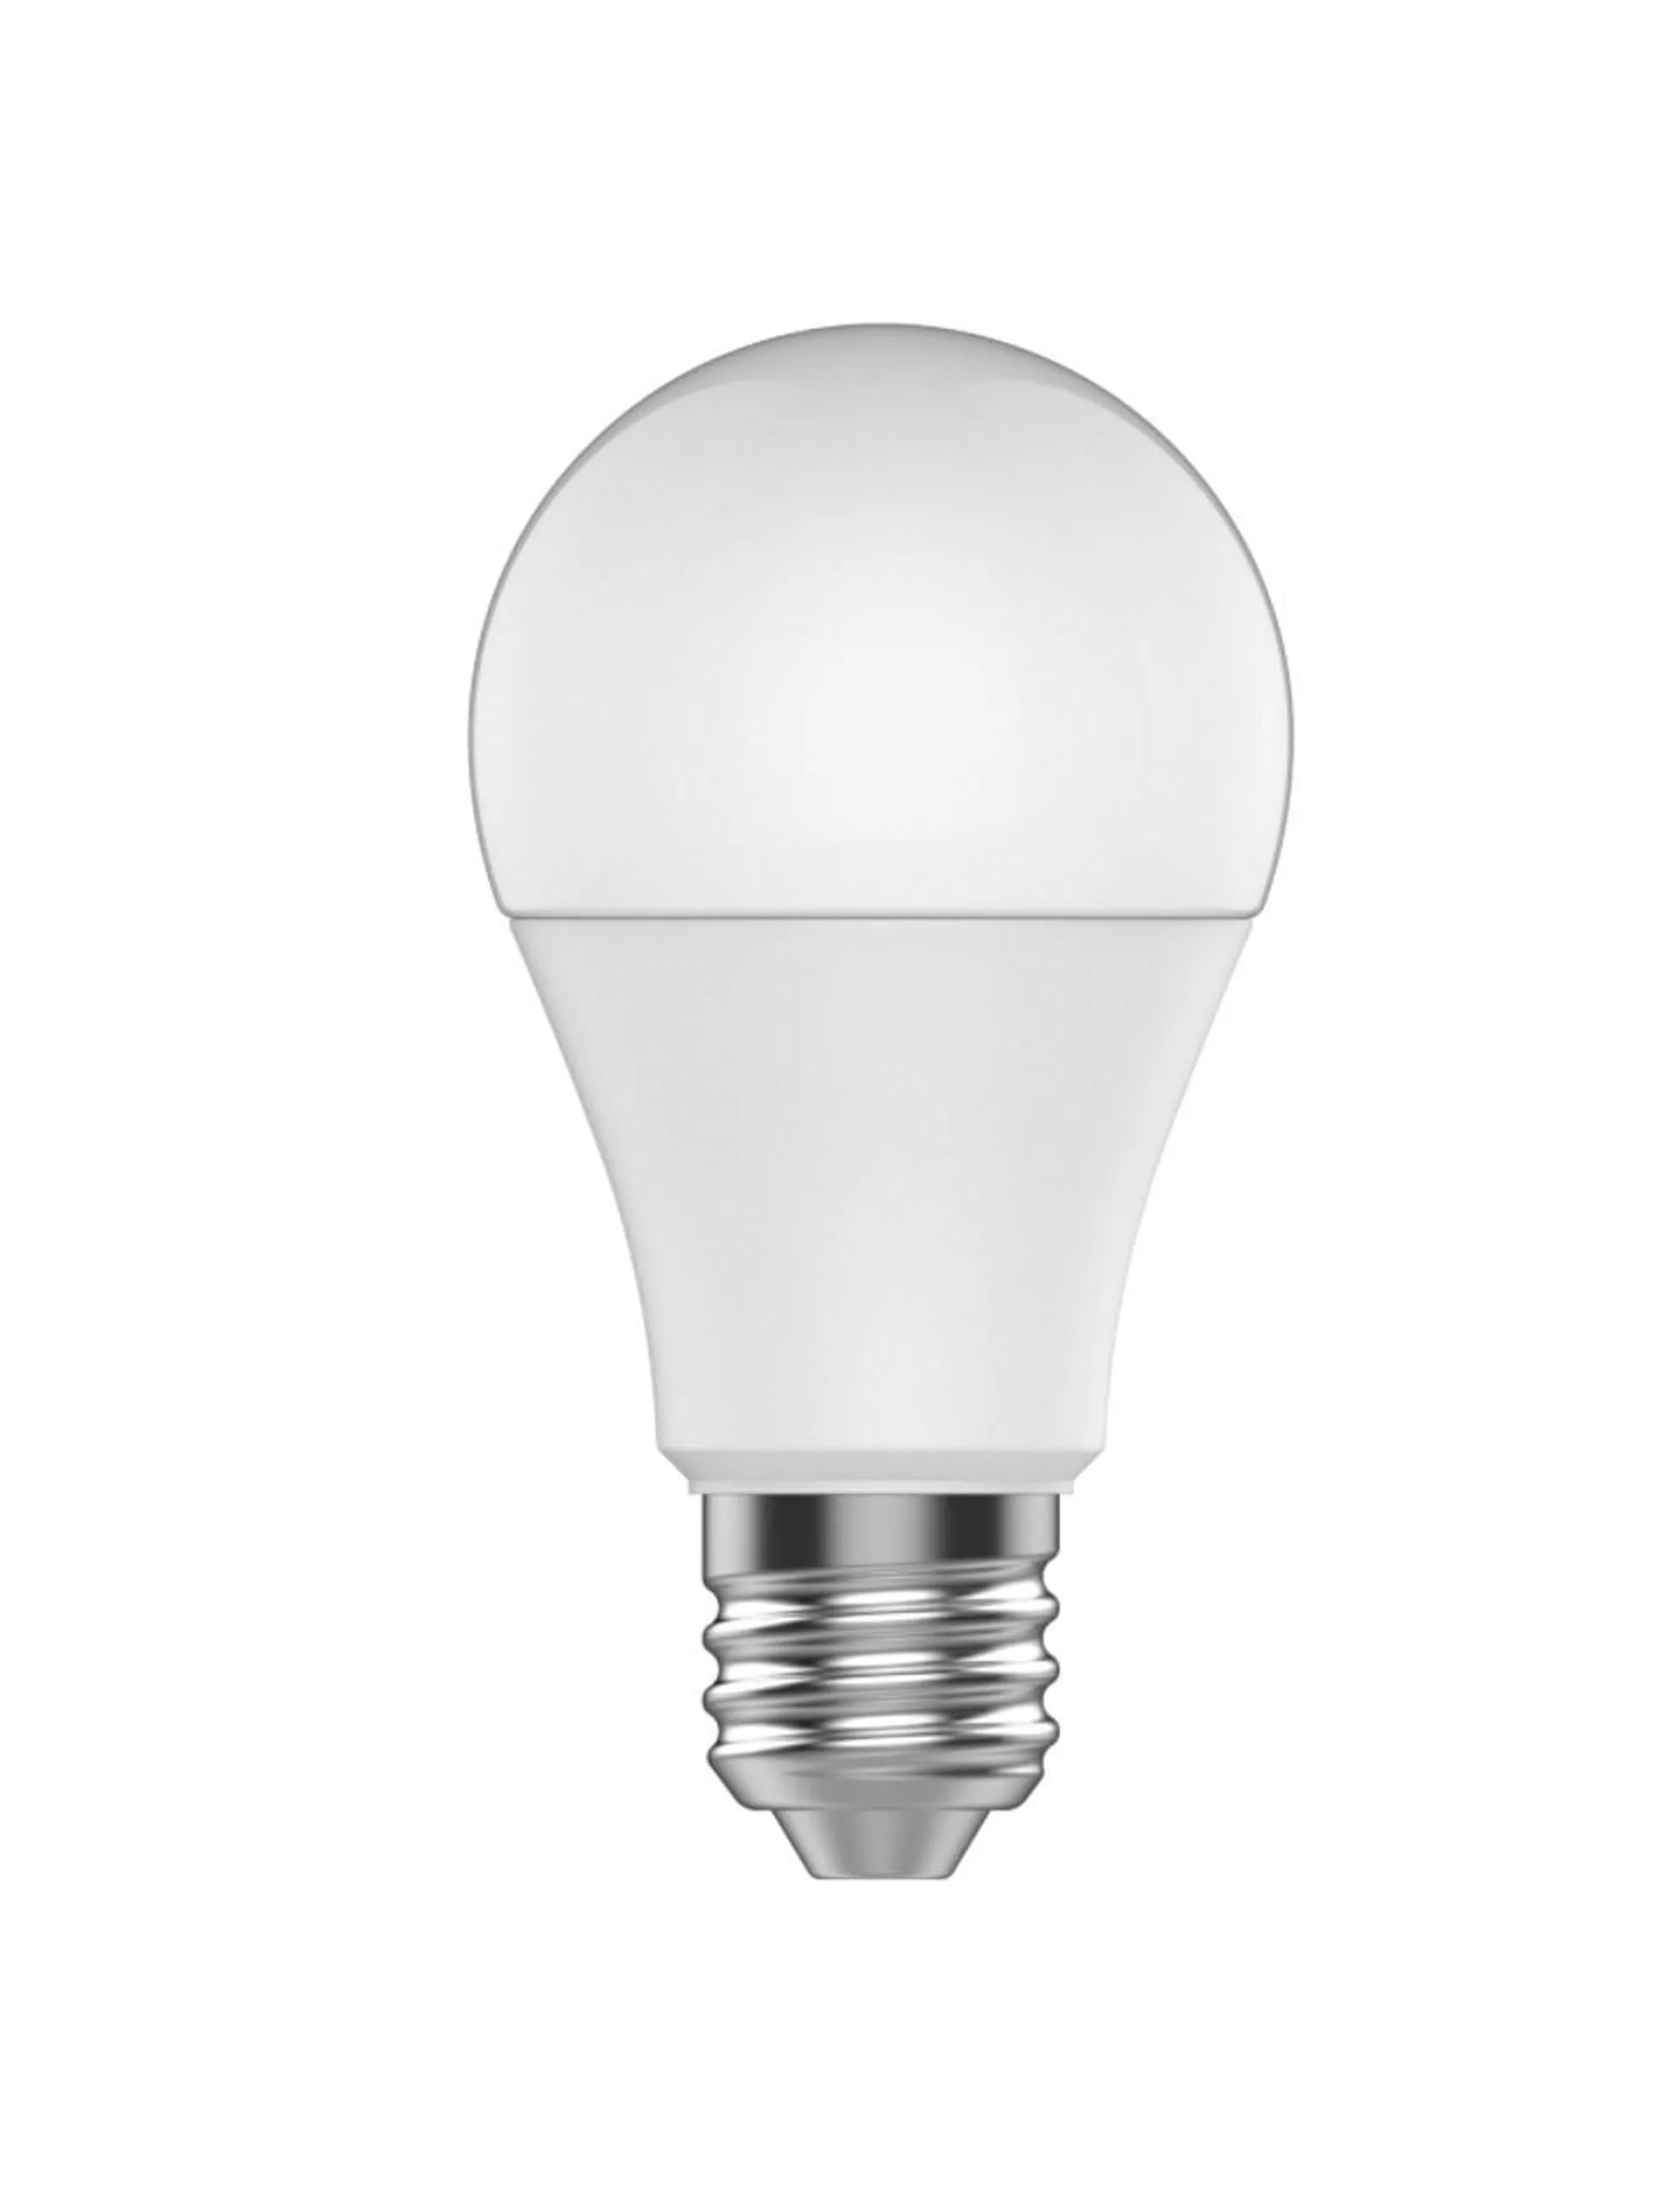 LED 10W 1050lm E27 Warm White Non Dimmable